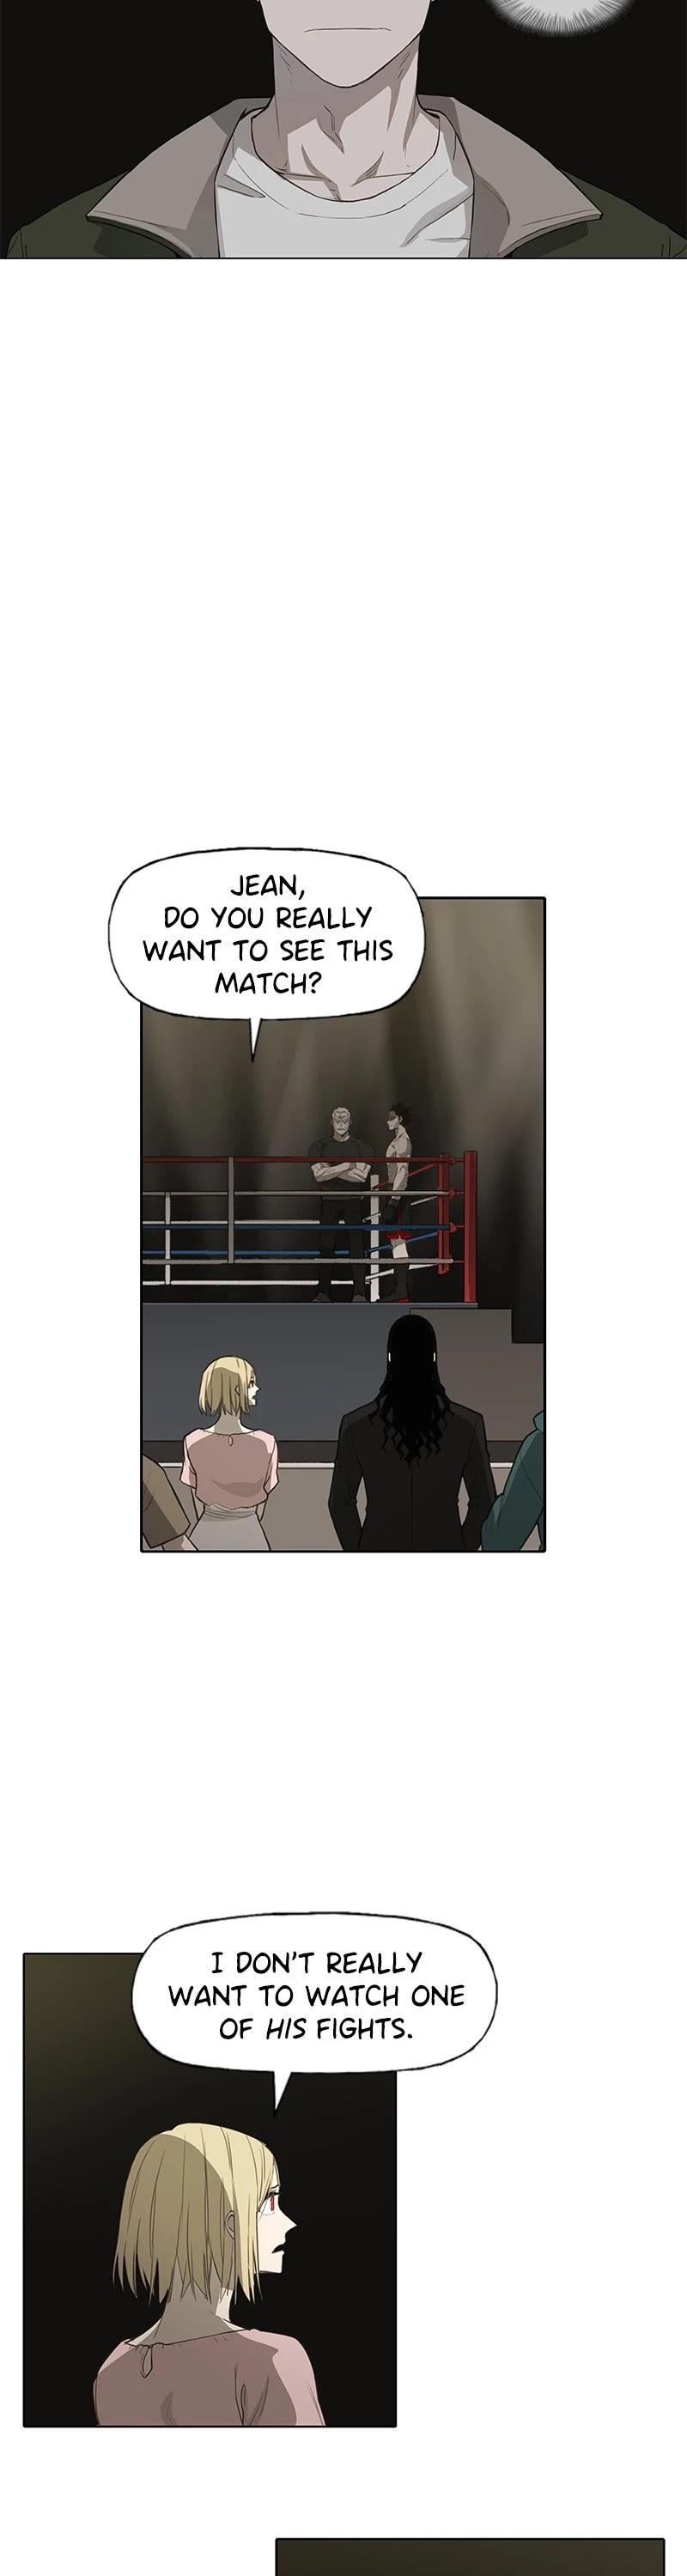 The Boxer Chapter 109: Ep. 99 - Darkness (2) page 17 - 